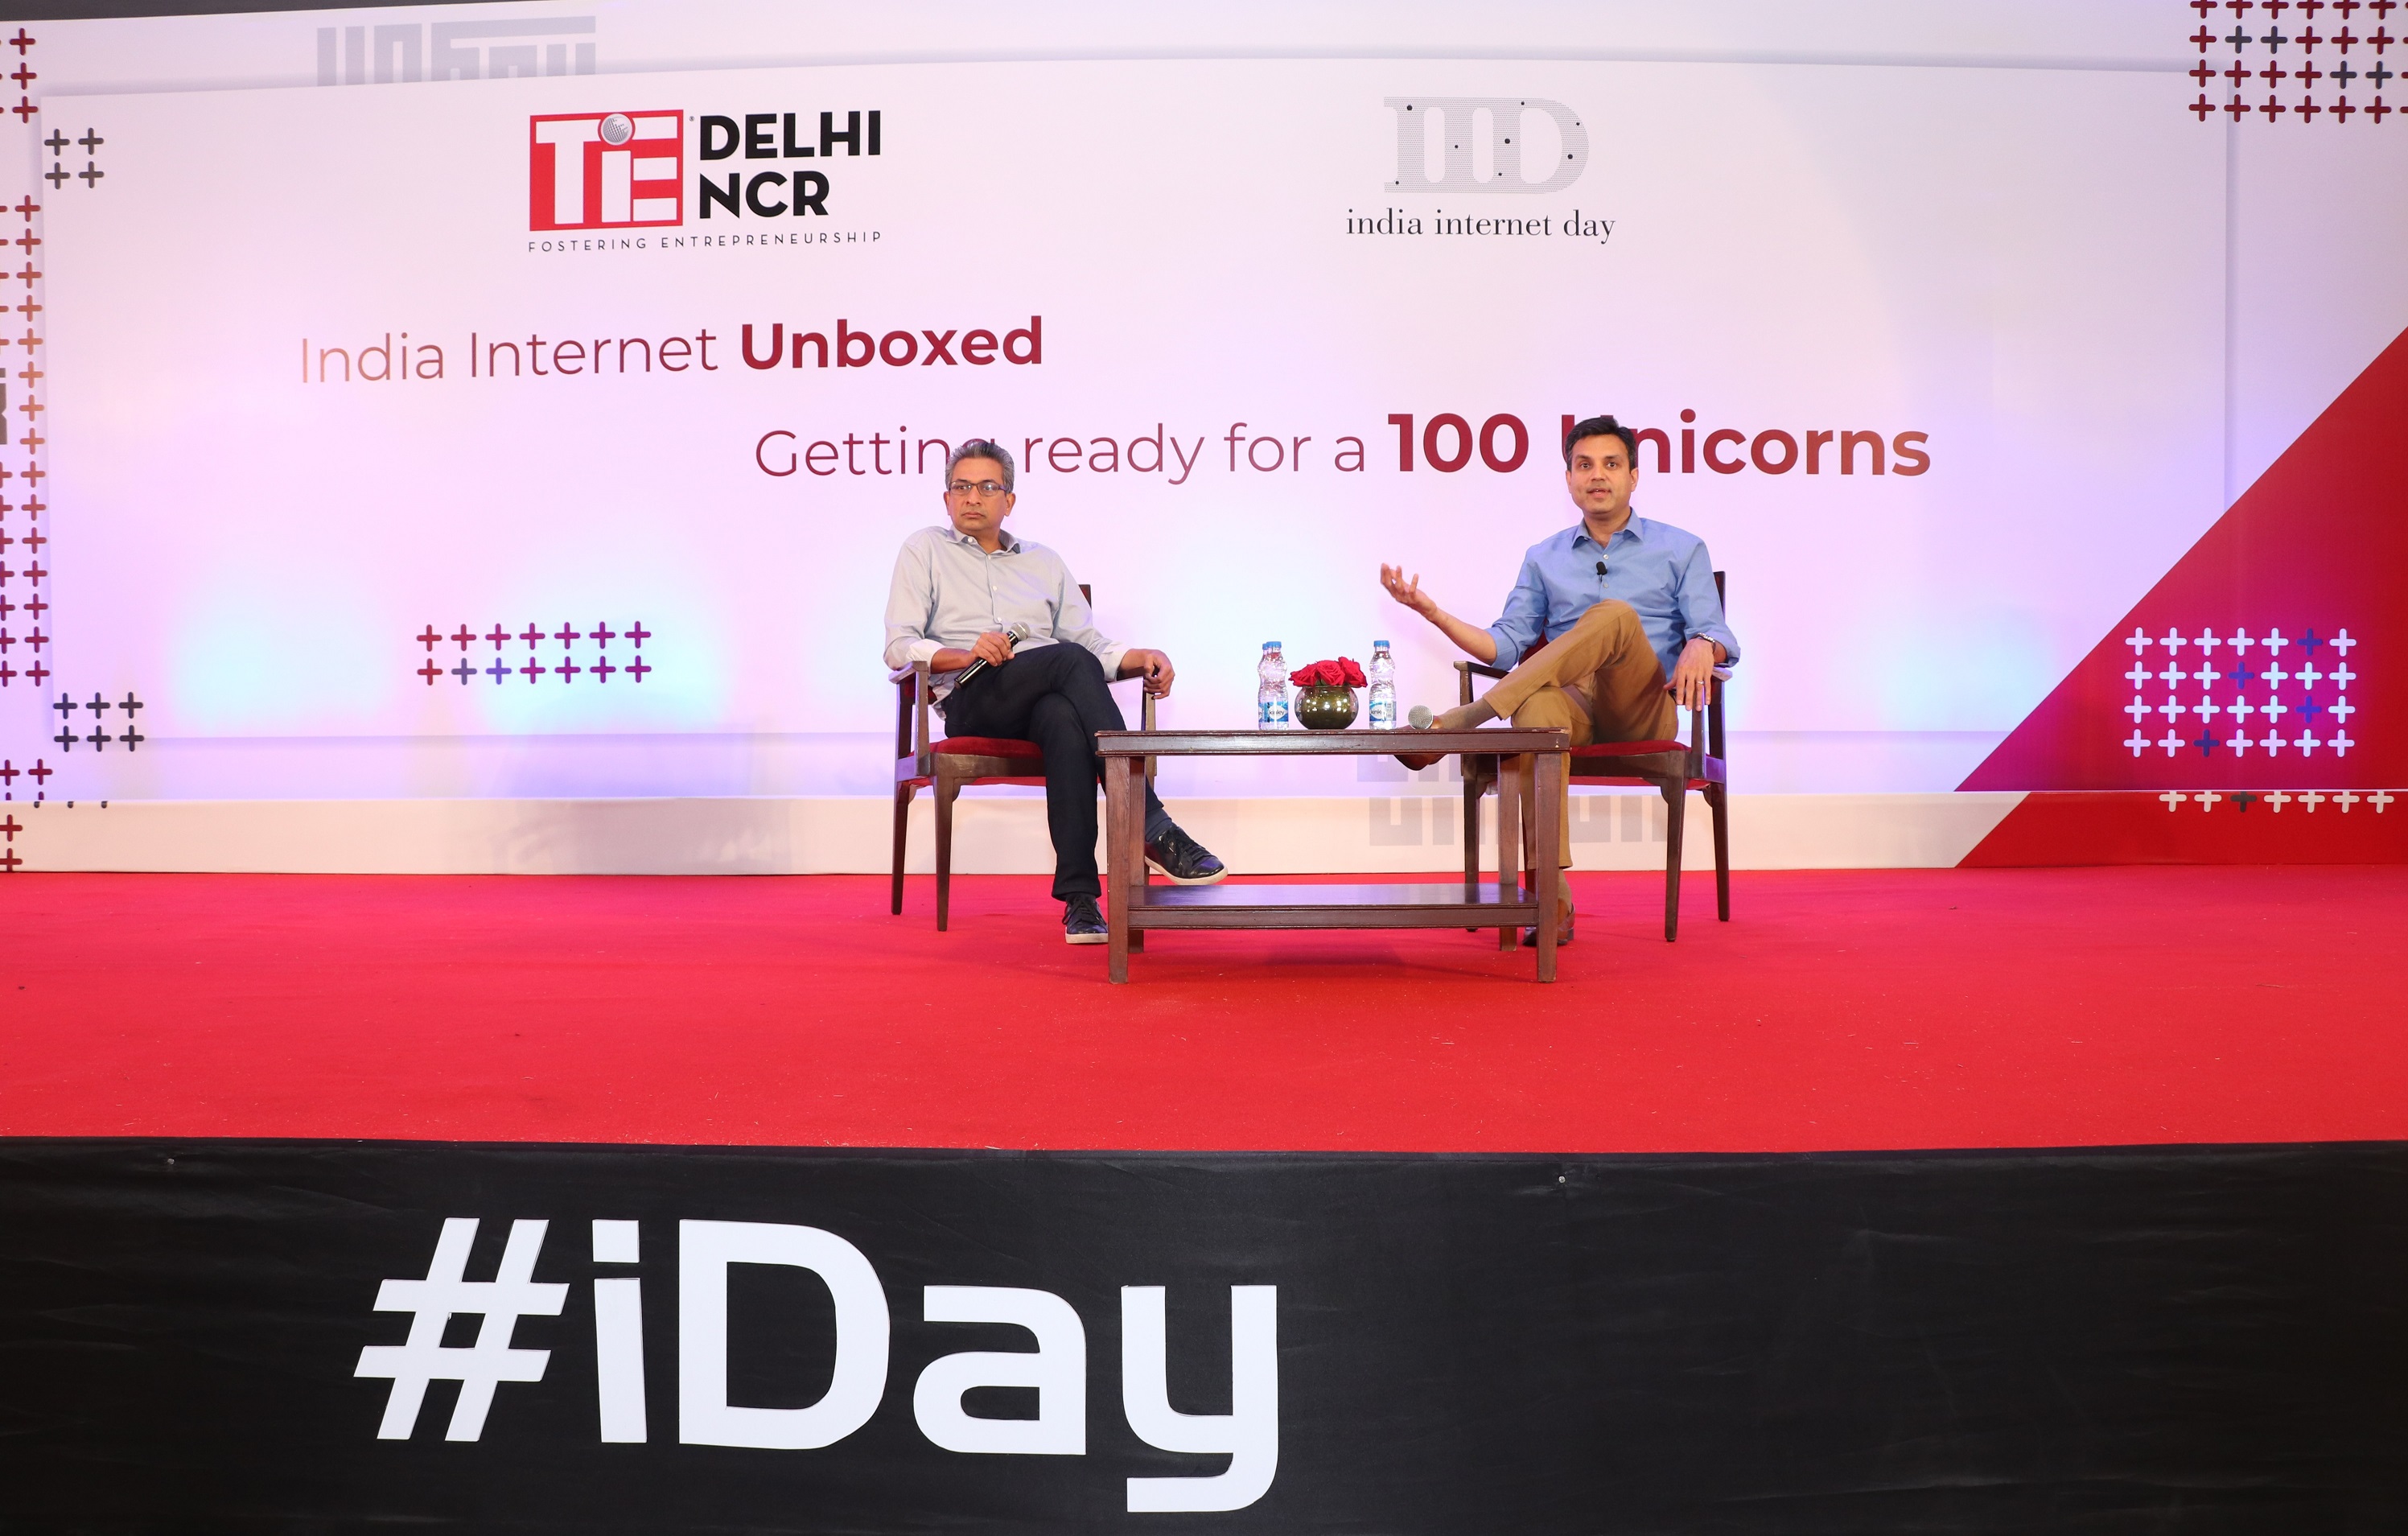 Hans Tung, Partner, GGVC projected at India Internet Day 2019 organized by TiE Delhi-NCR